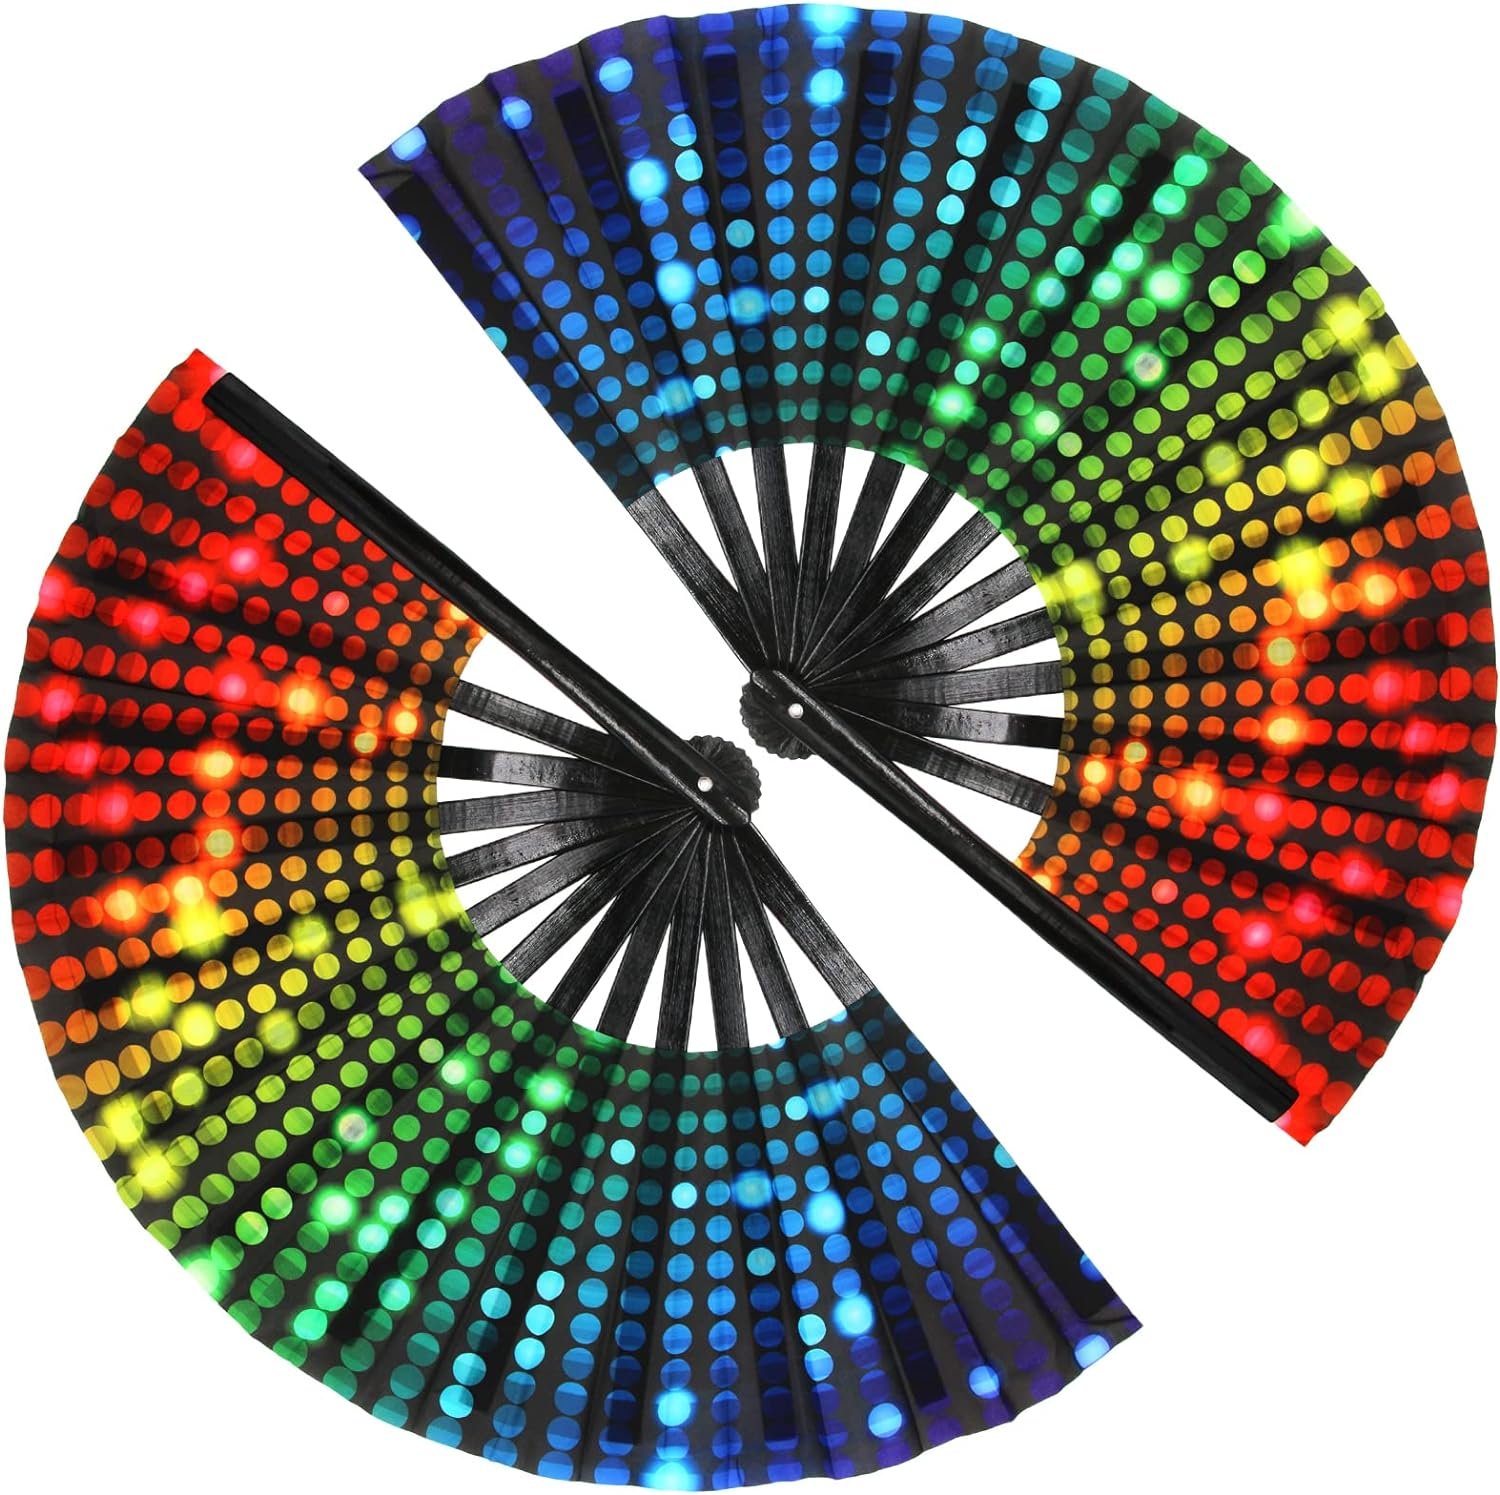 2 Pcs Big Folding Fans Colorful Rainbow Handheld Fan, Chinese Festival Party Decoration, Summer Rave Fans Hand Folding Fans for Pride Month (Neon Light) .jpg